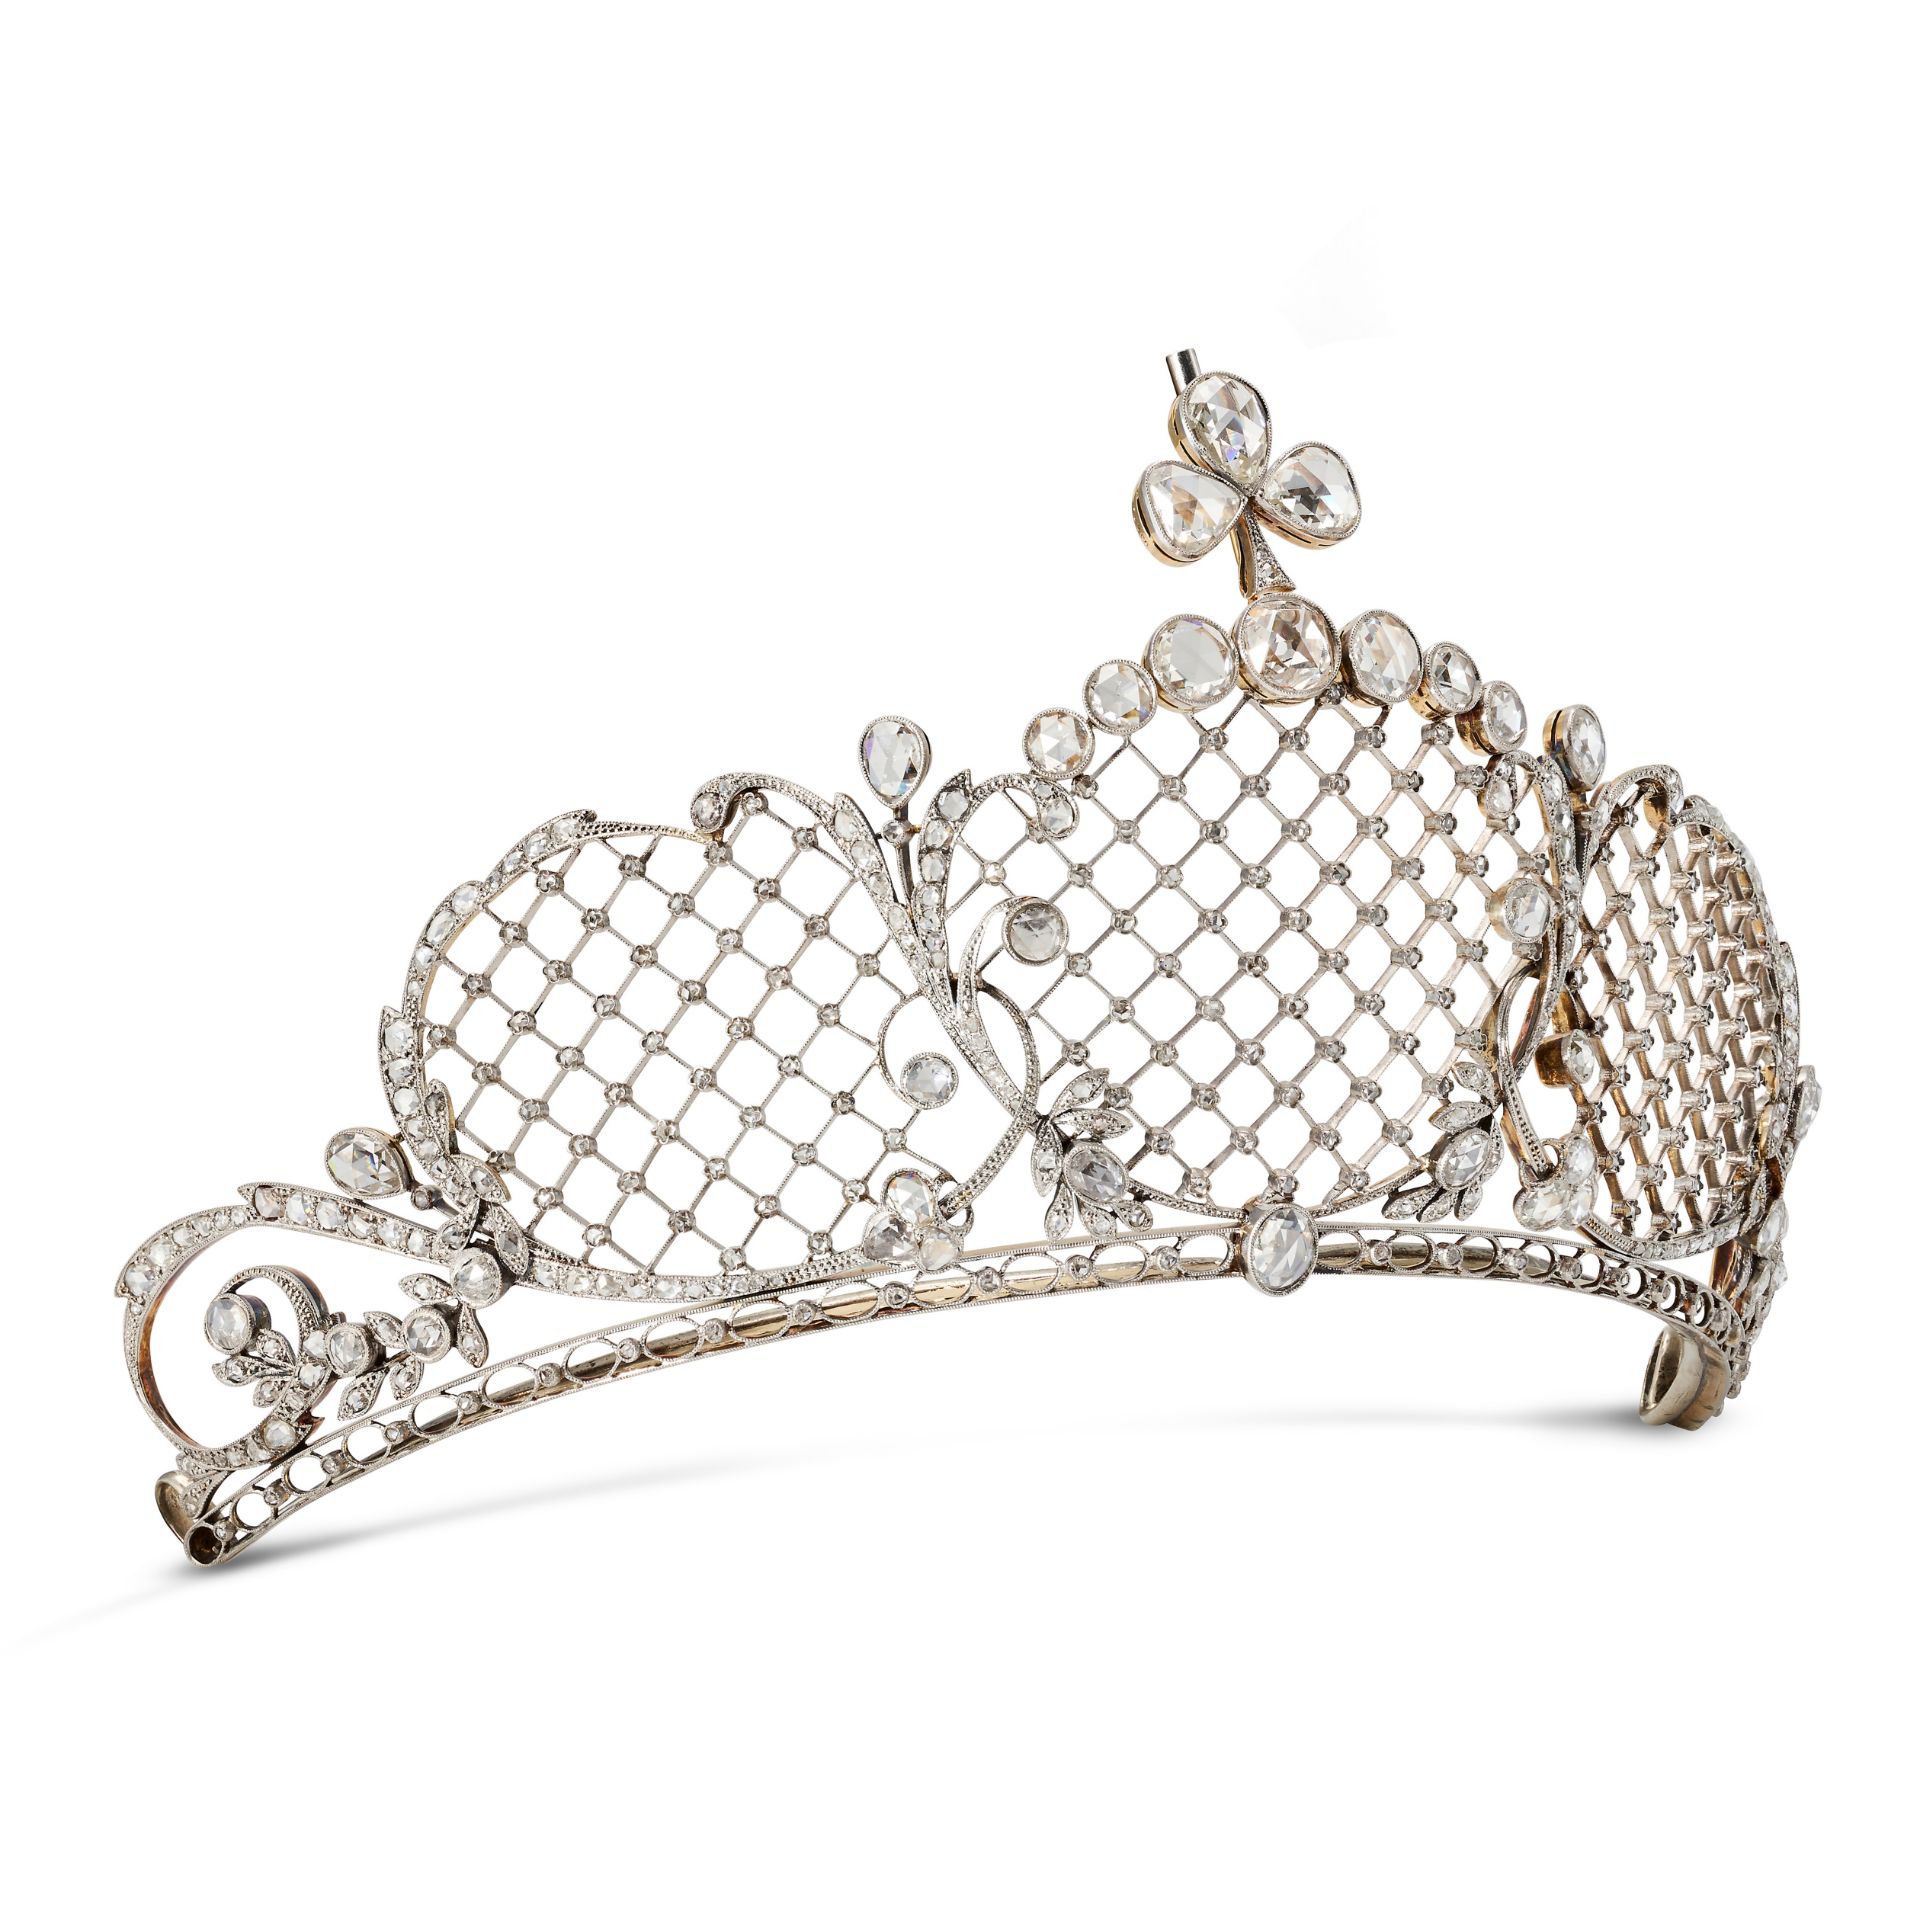 J.E CALDWELL, A FINE BELLE EPOQUE DIAMOND TIARA in 18ct yellow gold and platinum, the tapering la... - Image 6 of 6